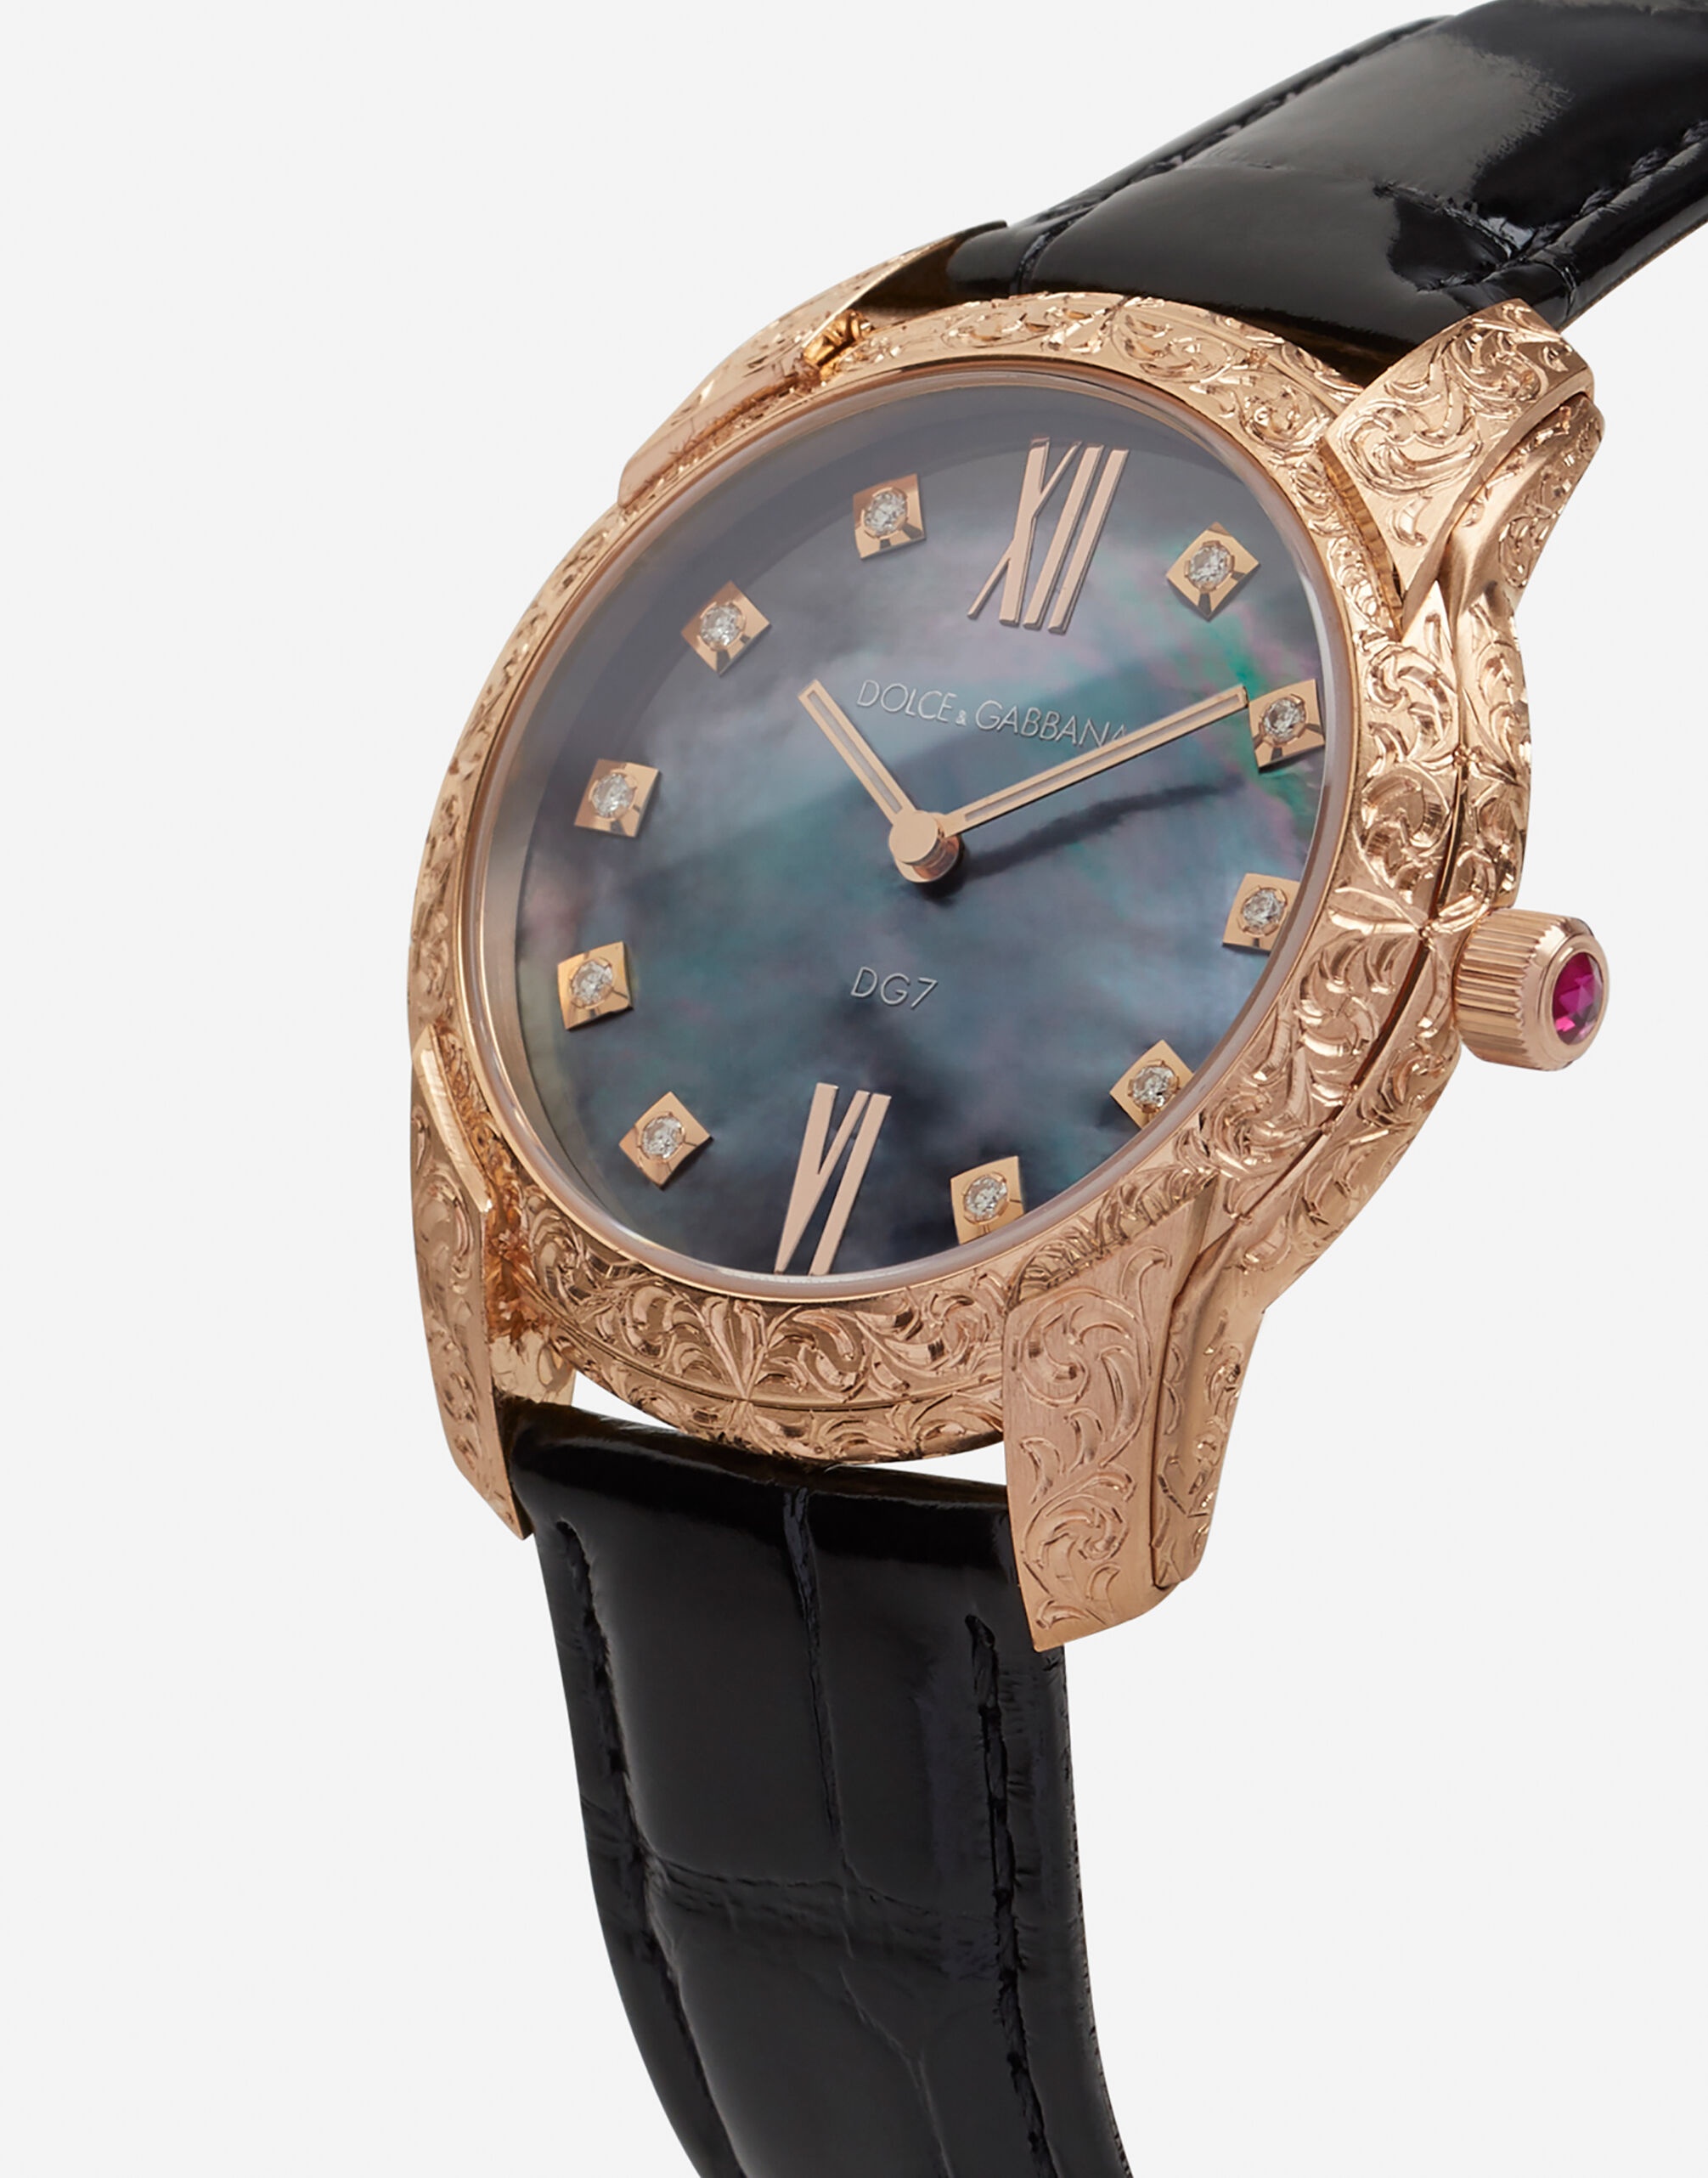 DG7 Gattopardo watch in red gold with black mother of pearl and diamonds - 2